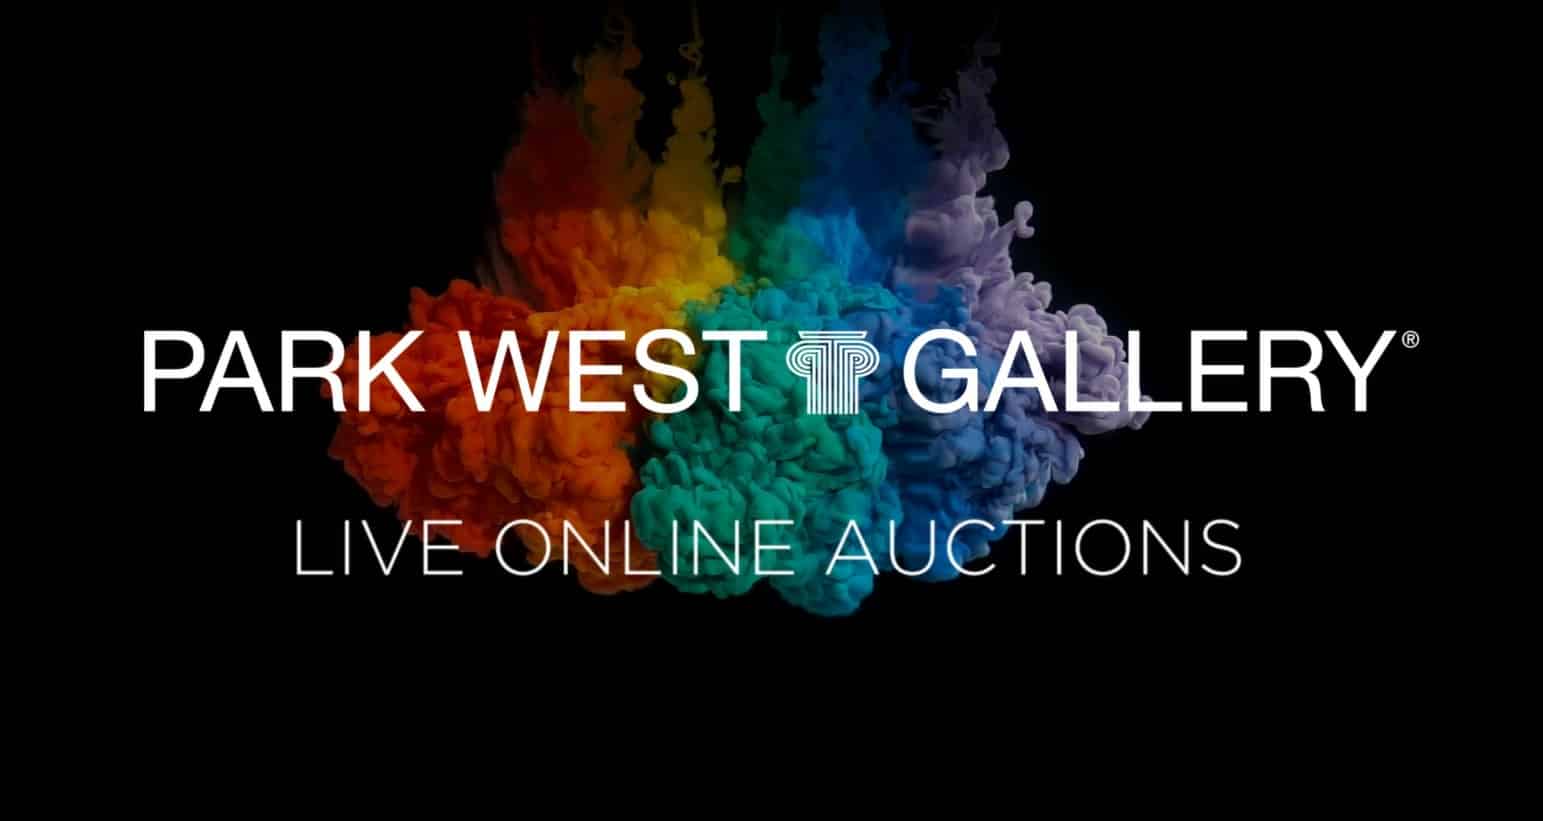 Live and Online Auctions on